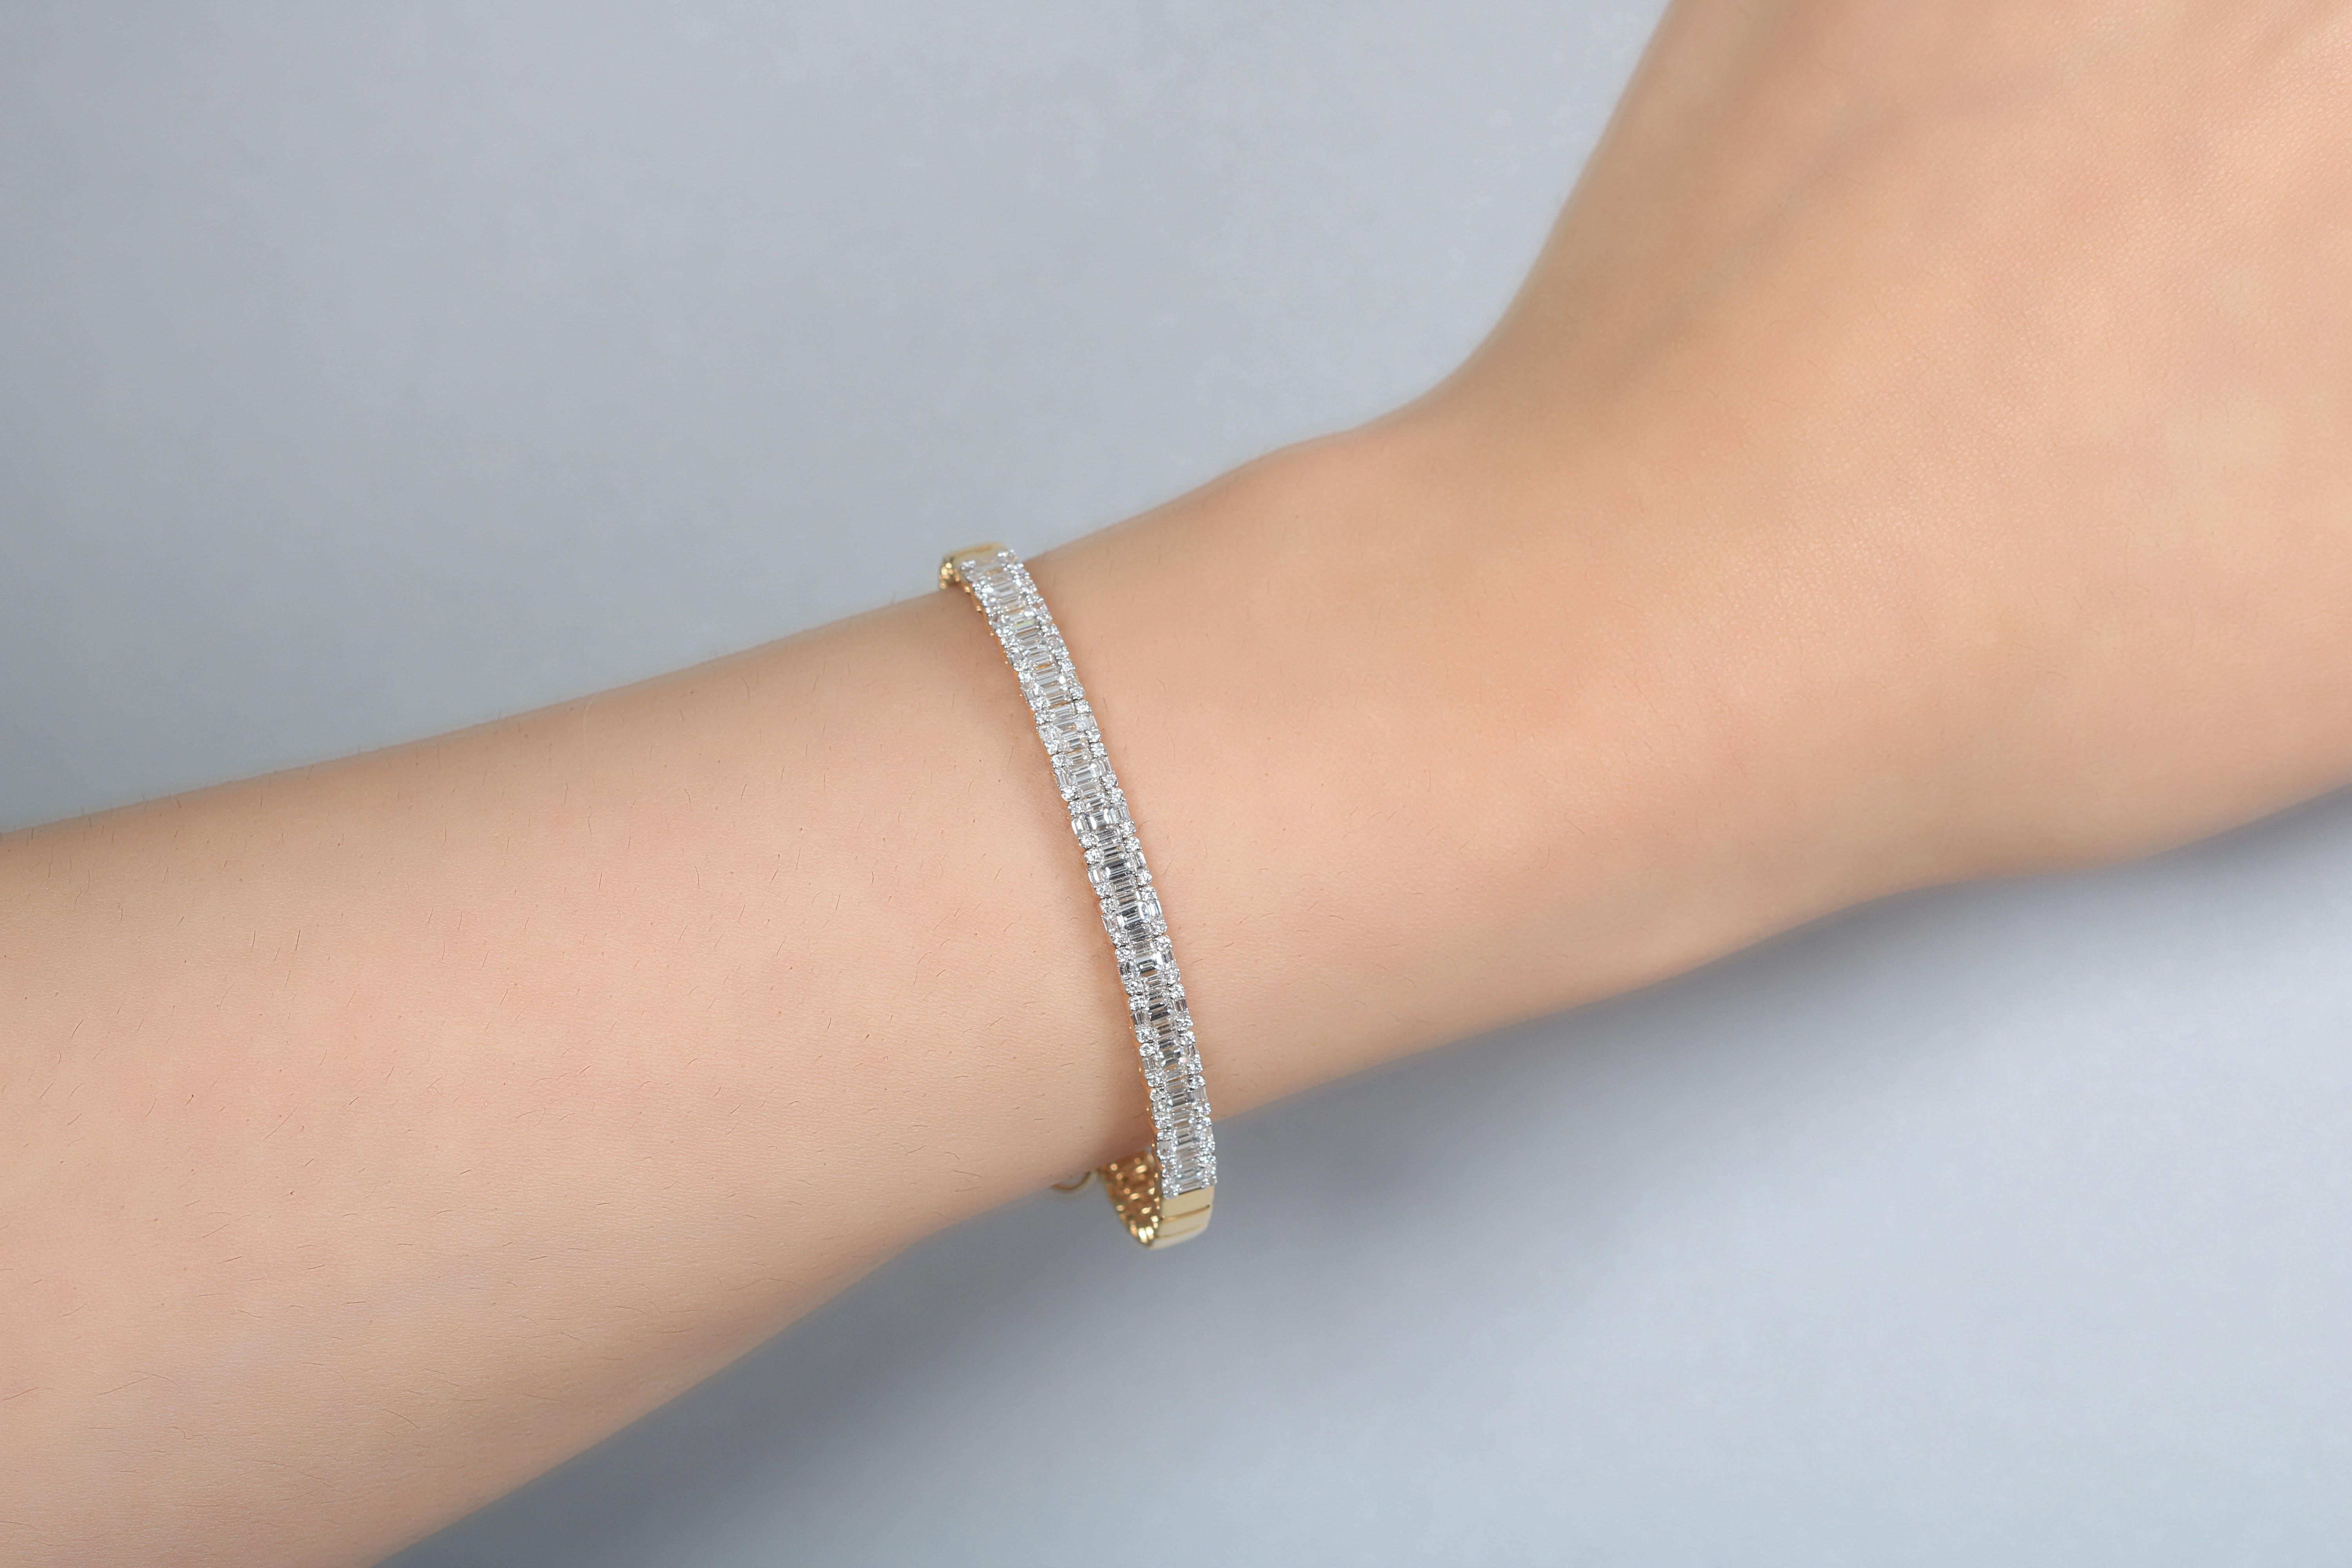 Simple and classy bracelet made by AMWAJ jewelry from yellow 18 karat gold and brilliant baguettes and round cut of diamonds .
elegant,sophisticated and ,because of its simplicity, its a perfect choice for any occasion.
Diamond clarity: VS SI / G H